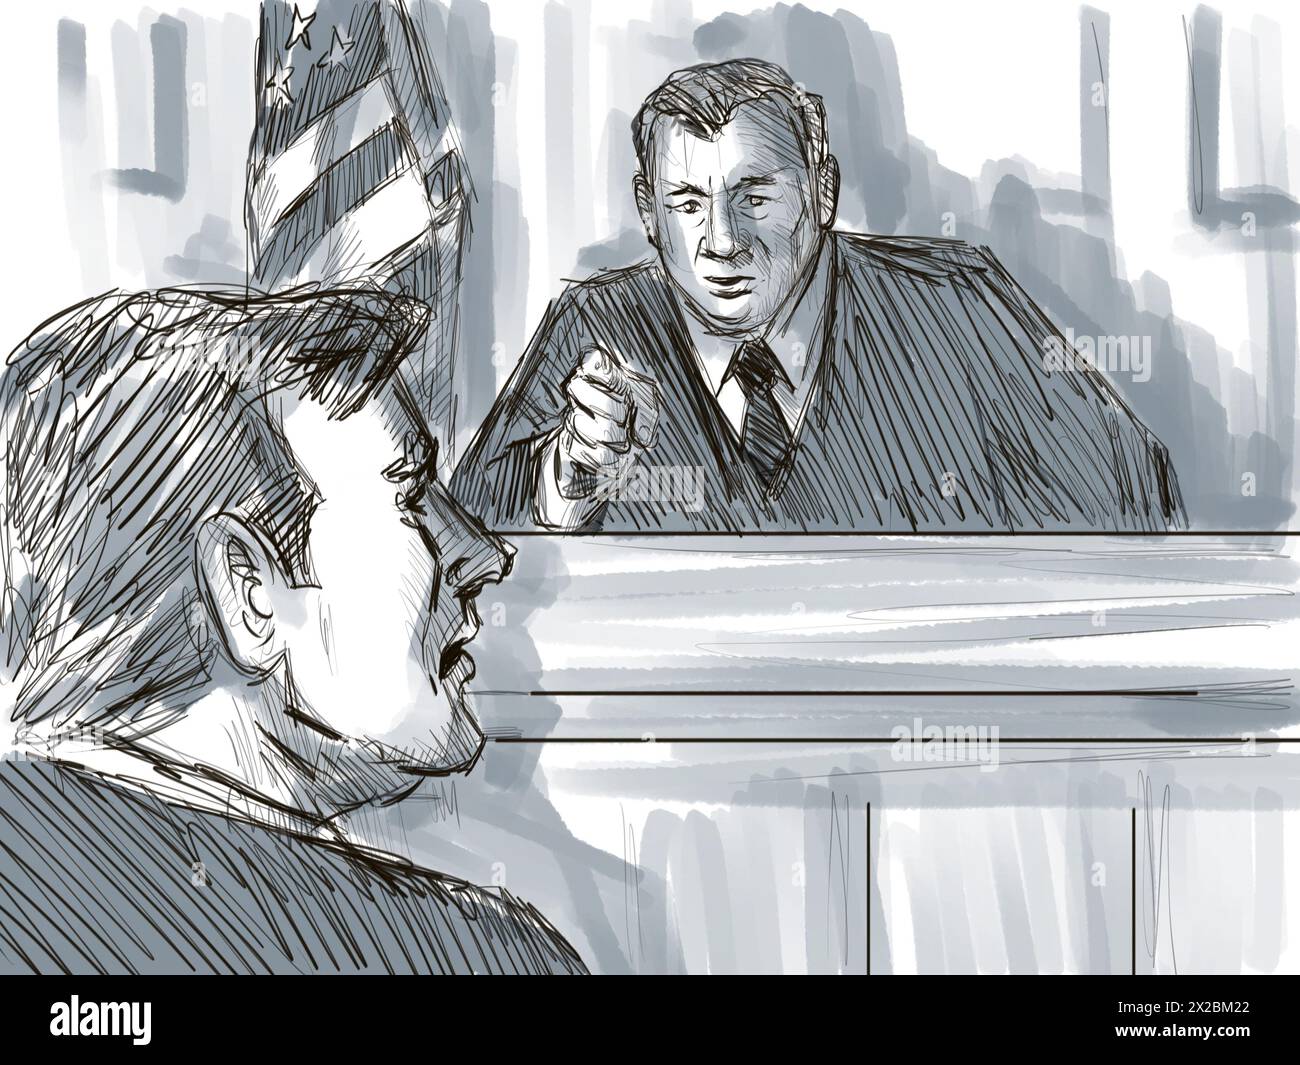 Pastel pencil pen and ink sketch illustration of a courtroom trial setting with judge reprimanding defendant or plaintiff, witness in contempt of cour Stock Photo